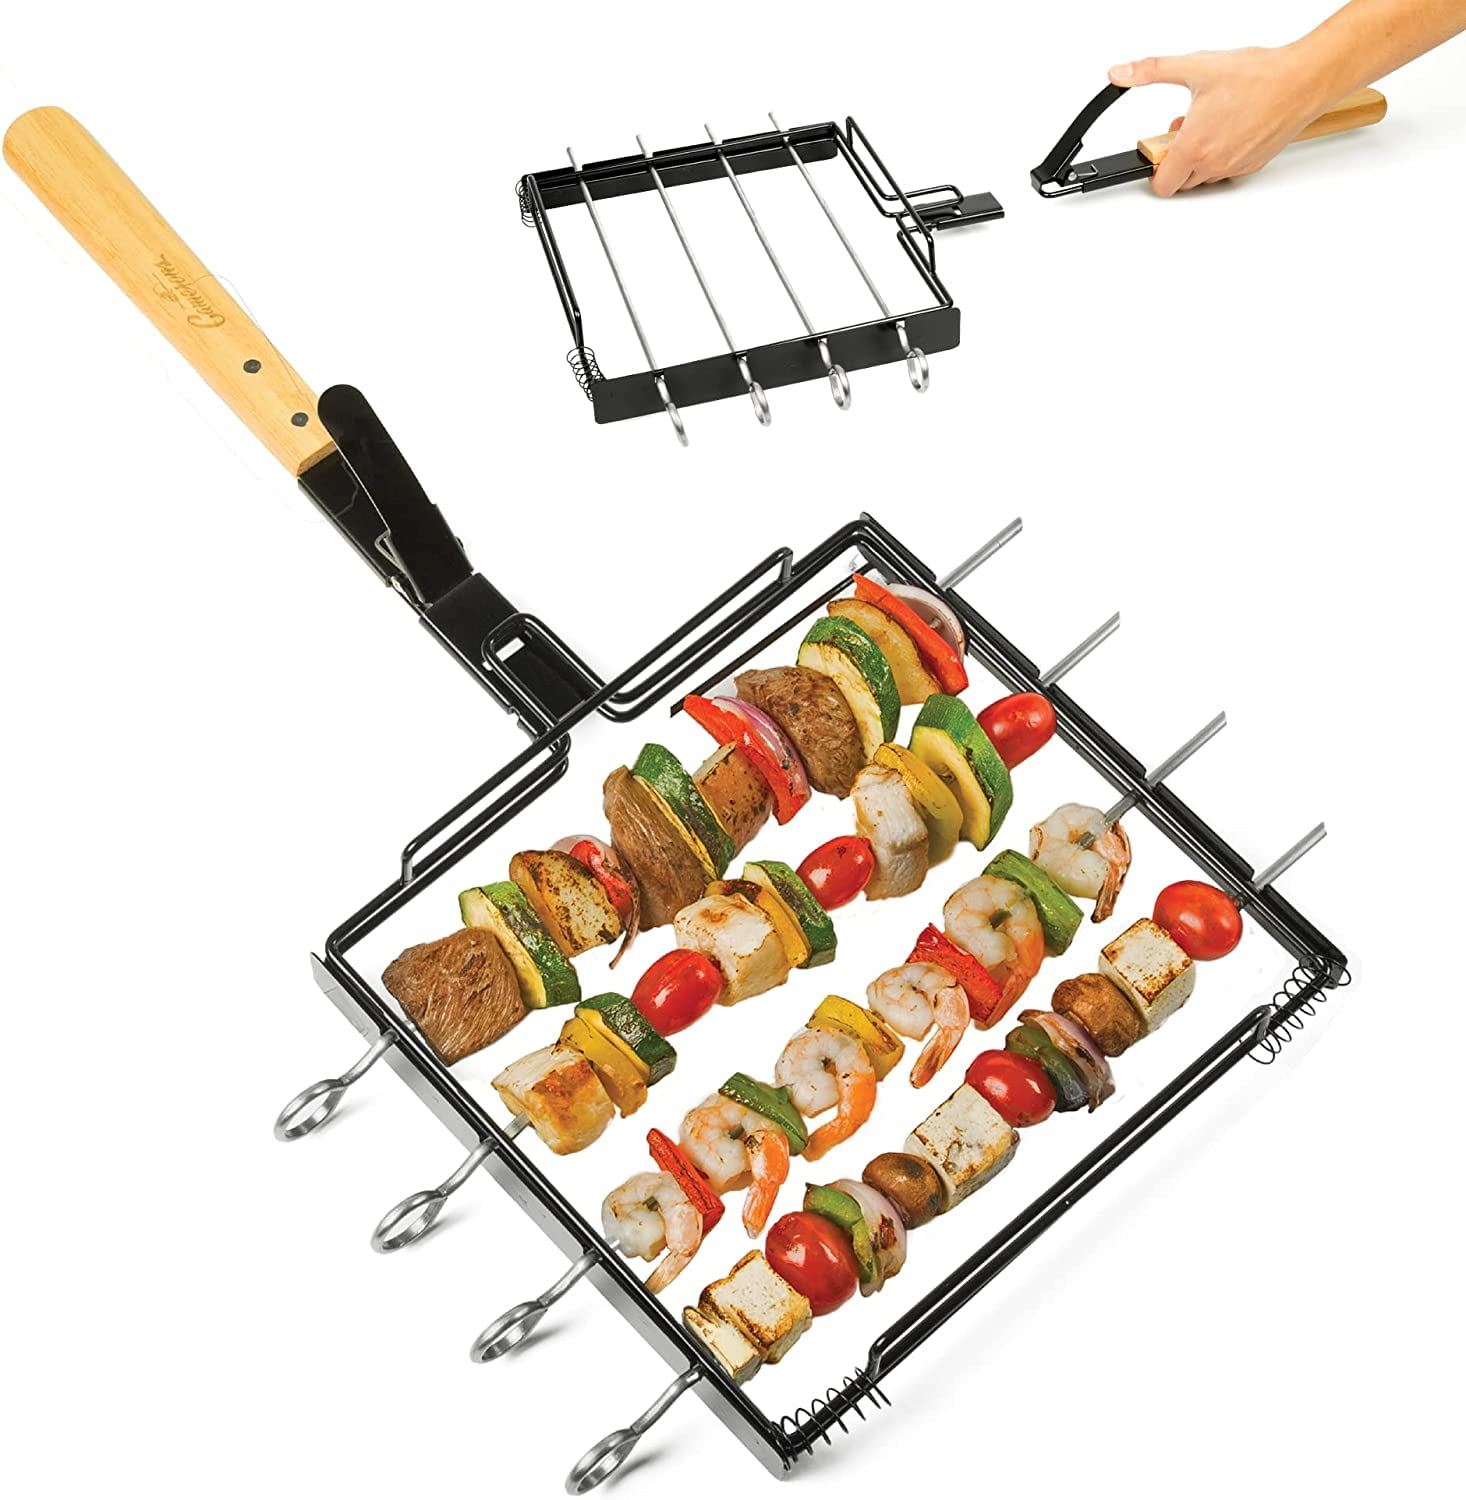 Non-Stick Grilling & Baking Sheet from Camerons Products